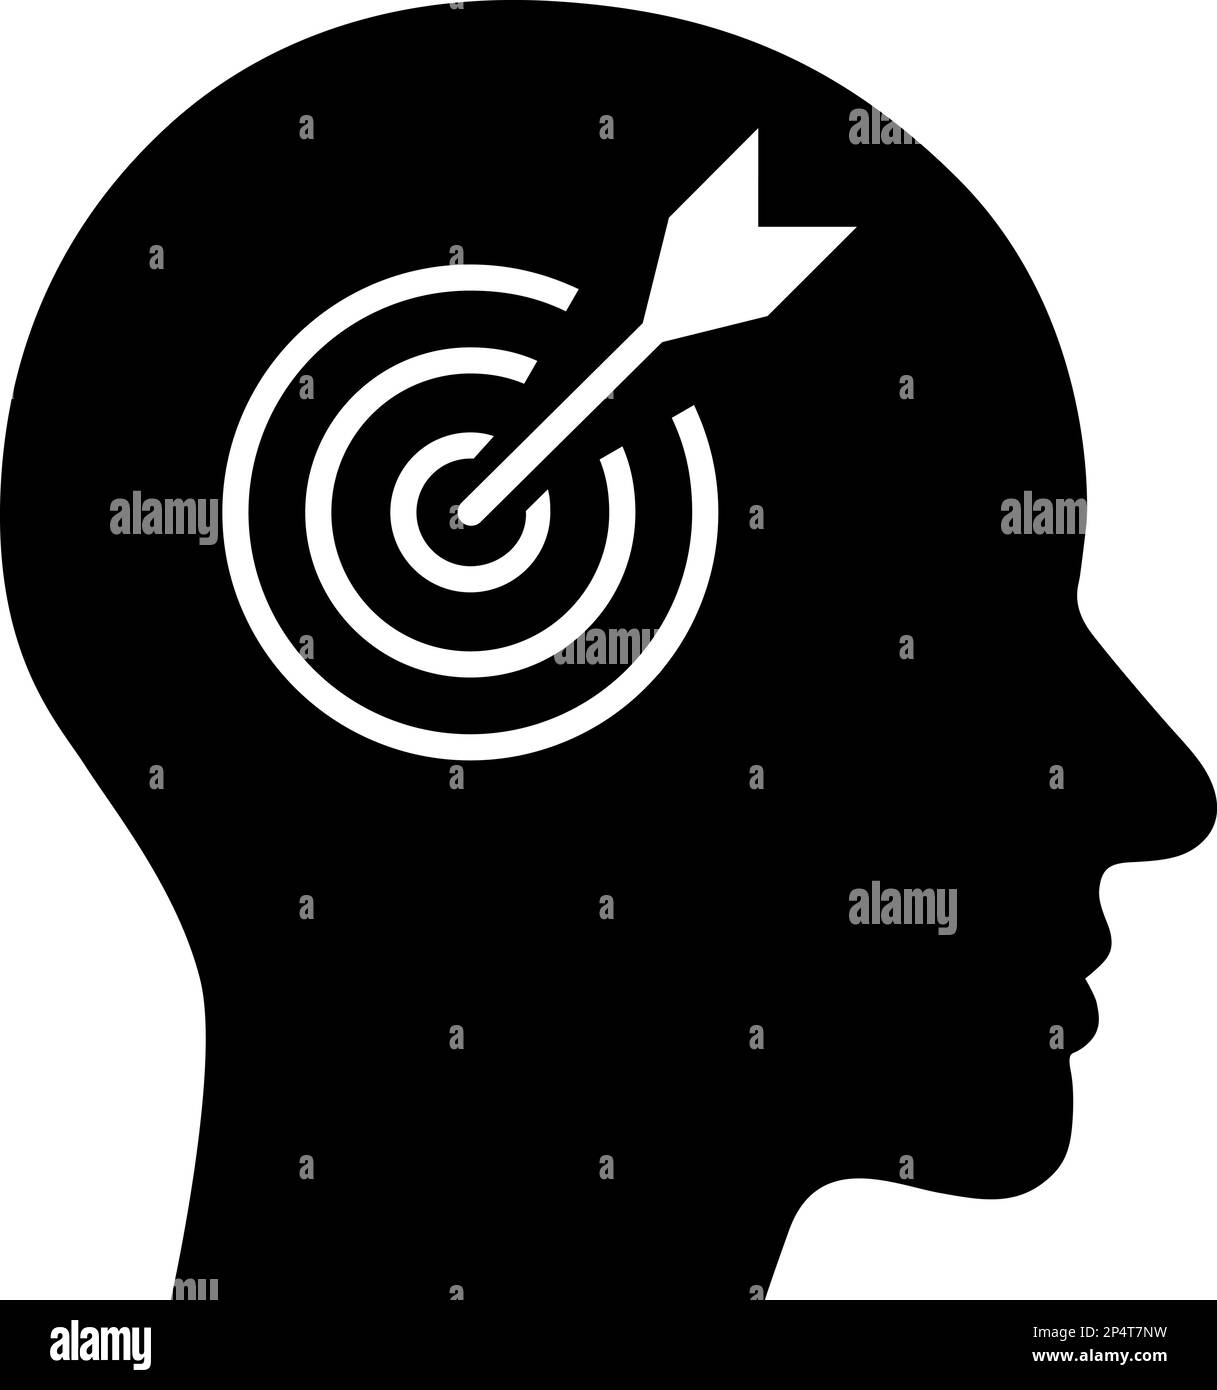 Flat icon of dart target in human brain as a concept of perception Stock Vector